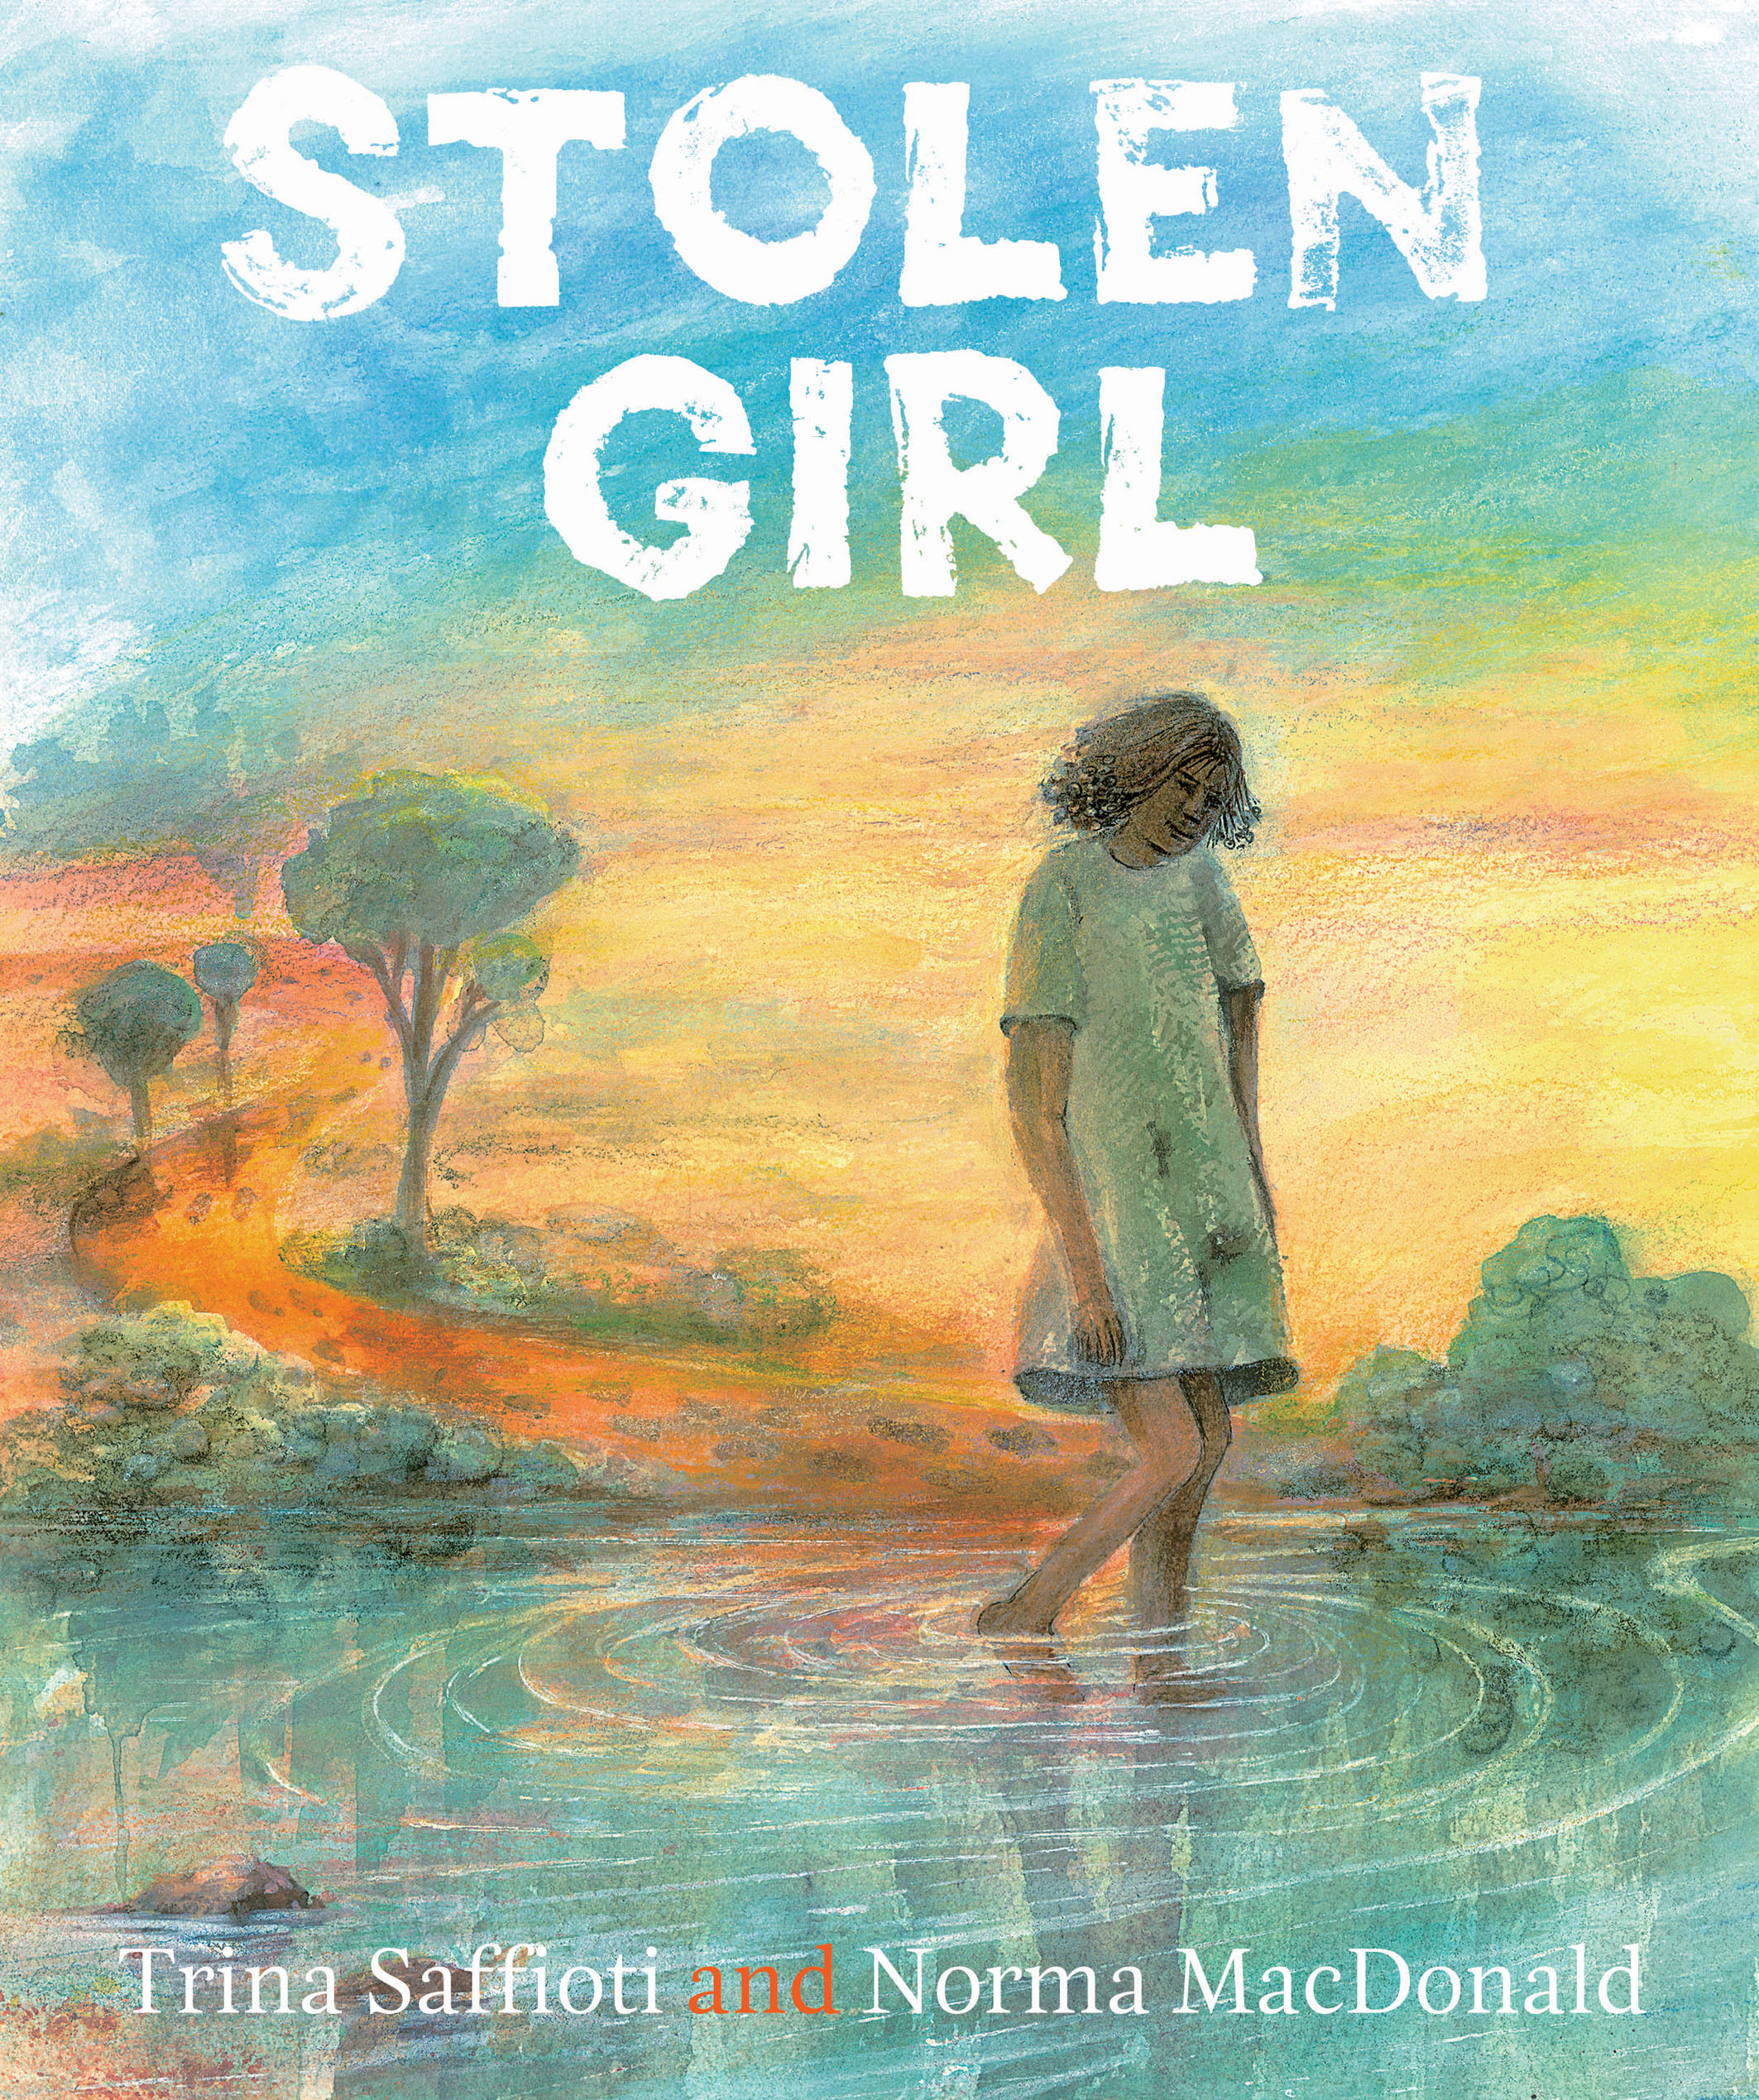 book review on girl stolen